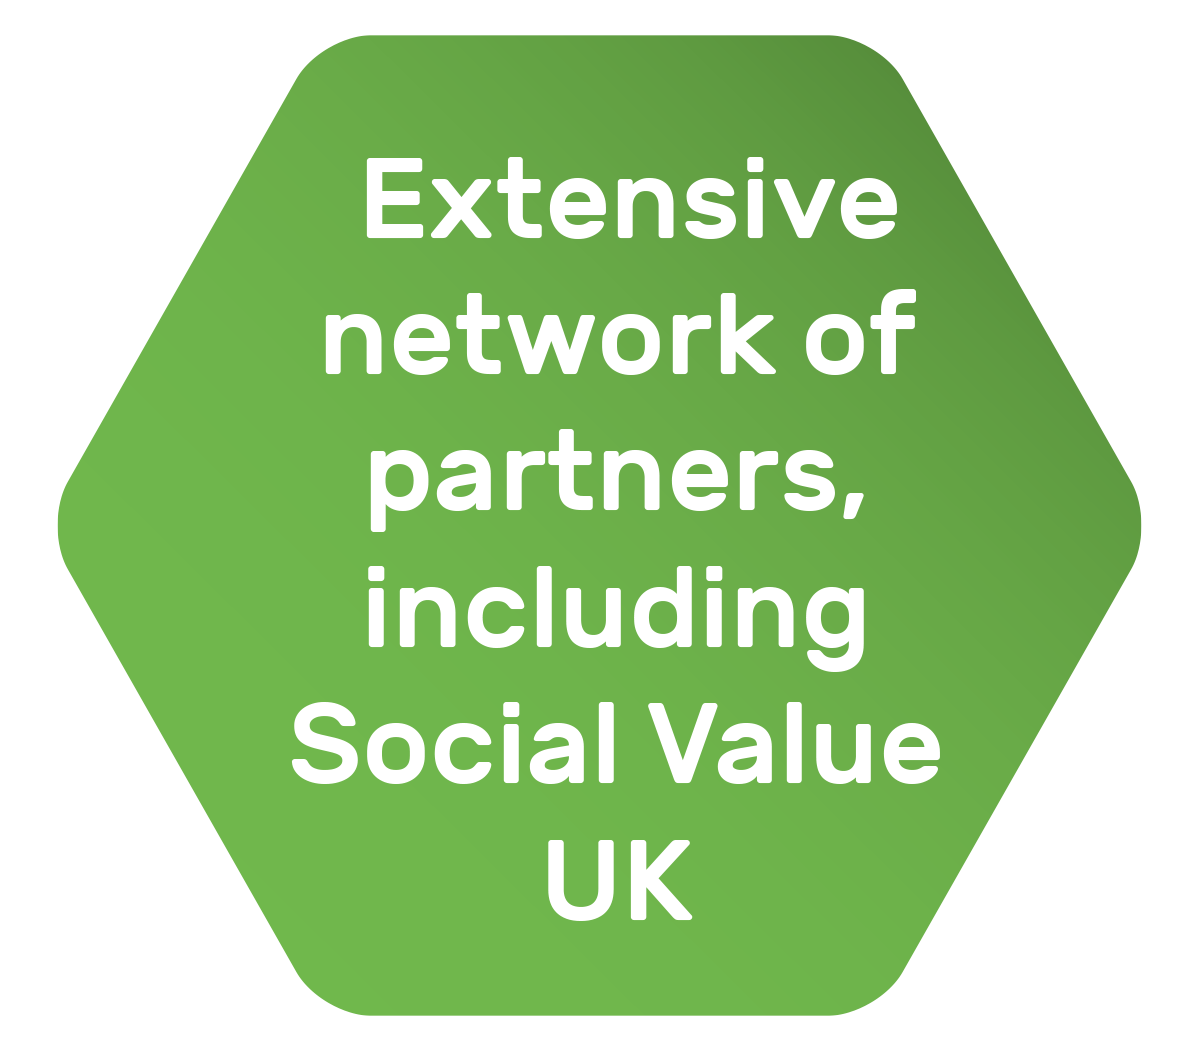  Extensive network of partners, including Social Value UK